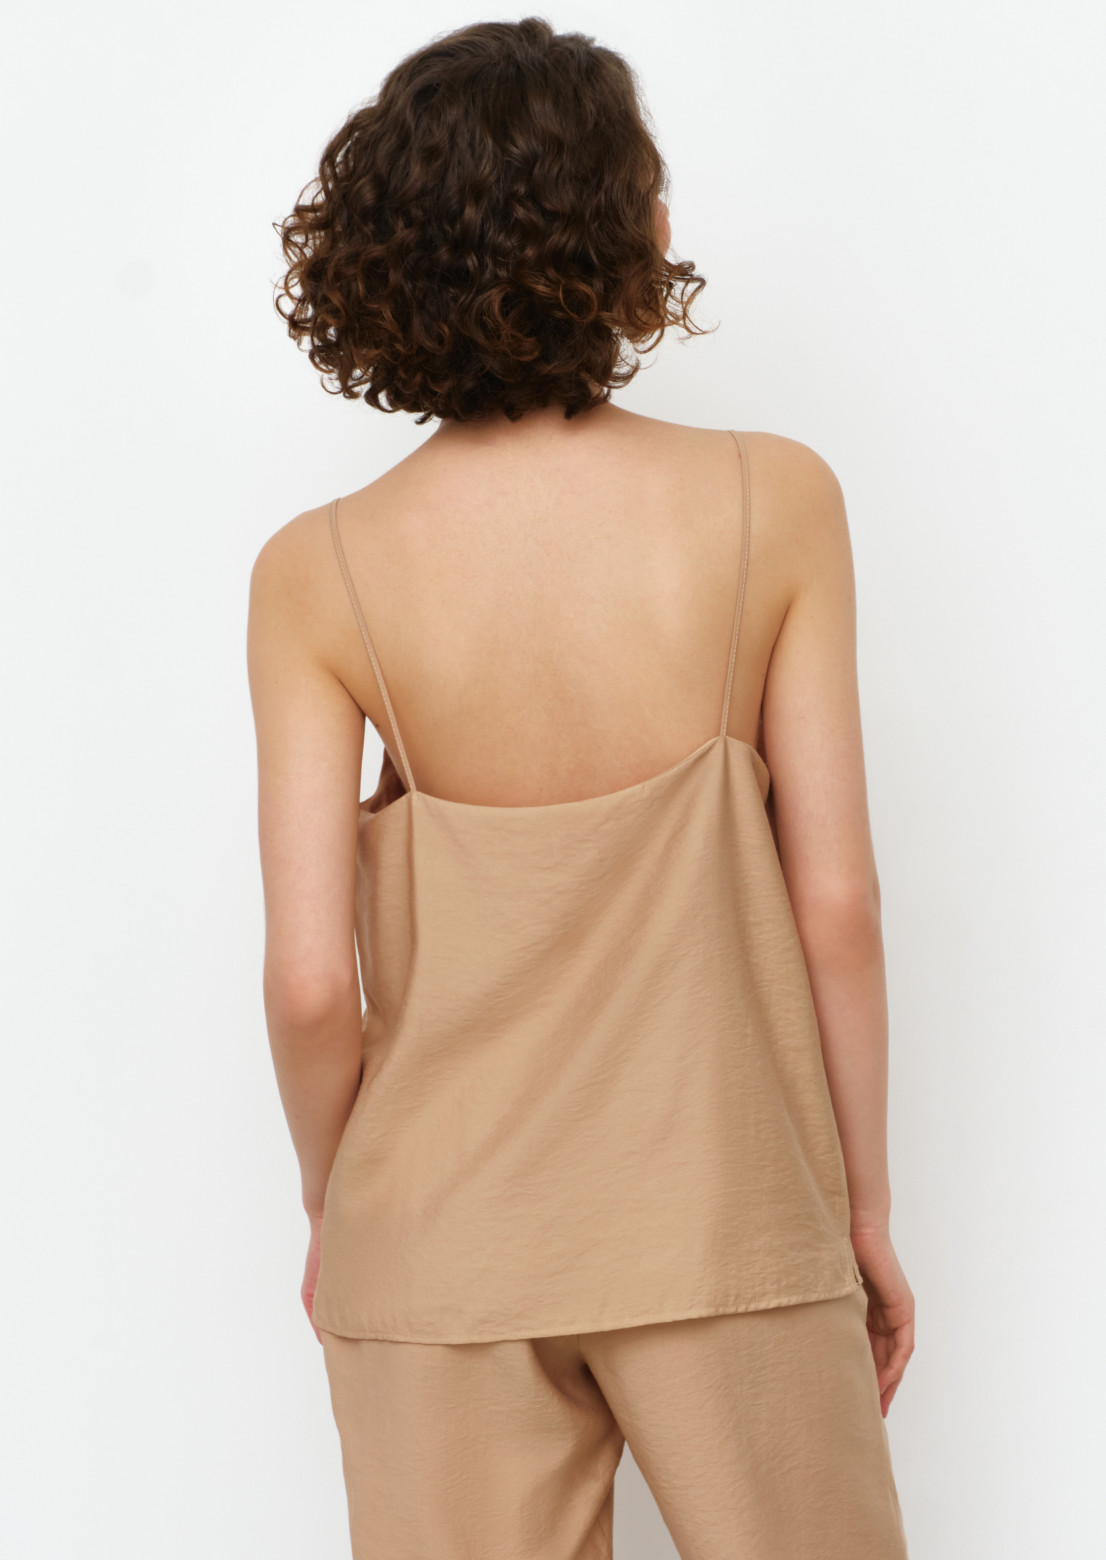 Beige colour top with thin straps